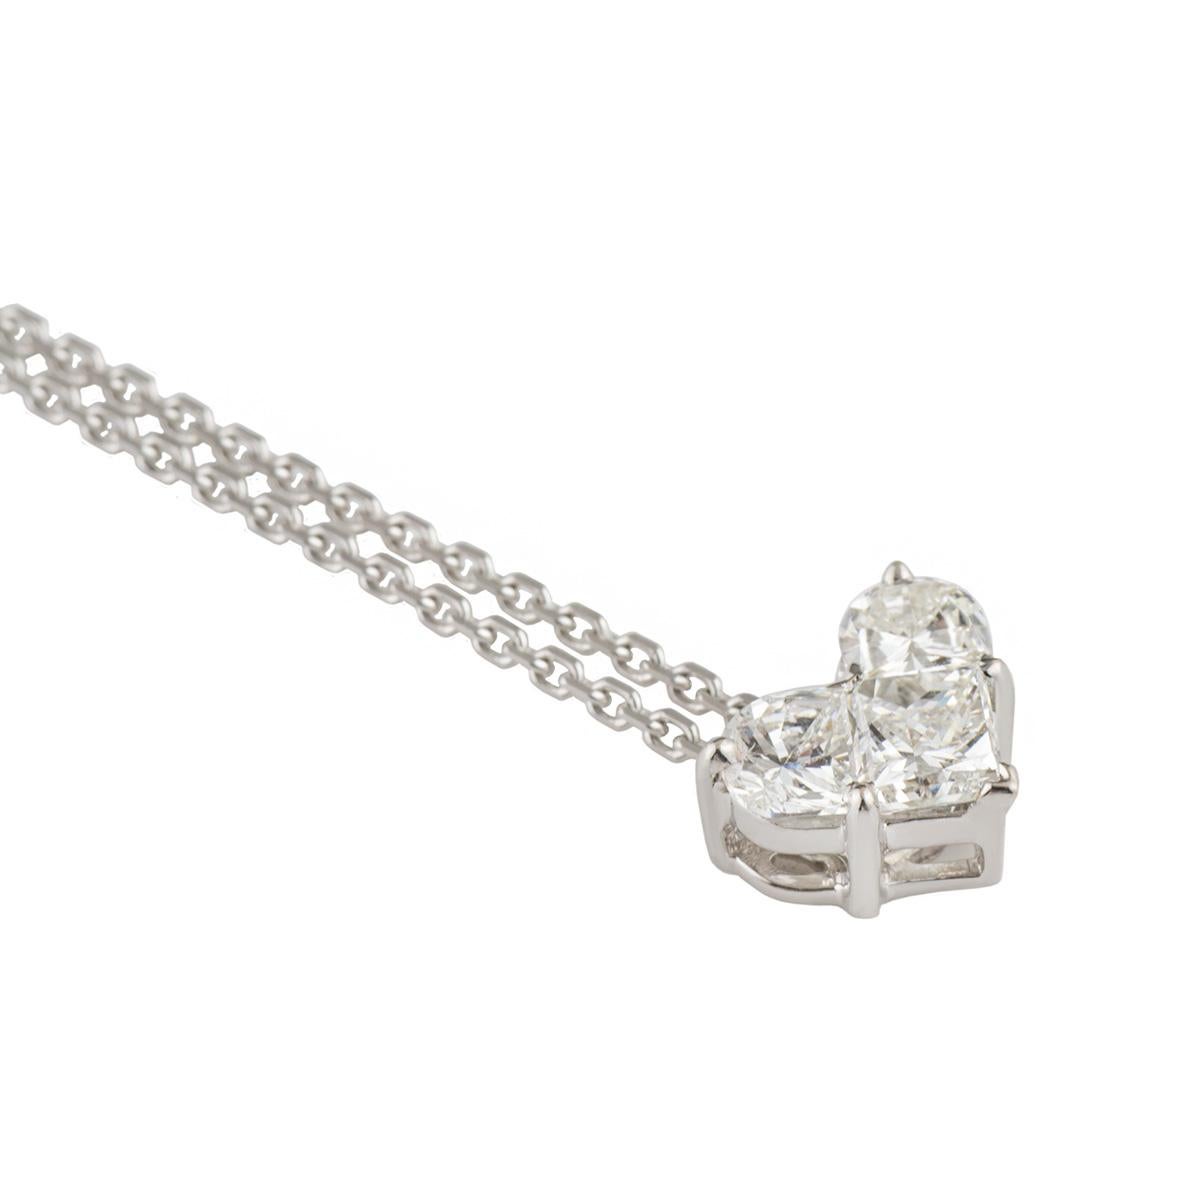 A sparkly 18k white gold diamond heart pendant. The pendant comprises of 2 half moon cut diamonds and a princess cut diamond to form a pure heart shape, with a total diamond weight of approximately 0.65ct, predominantly H colour and VS1 clarity. The